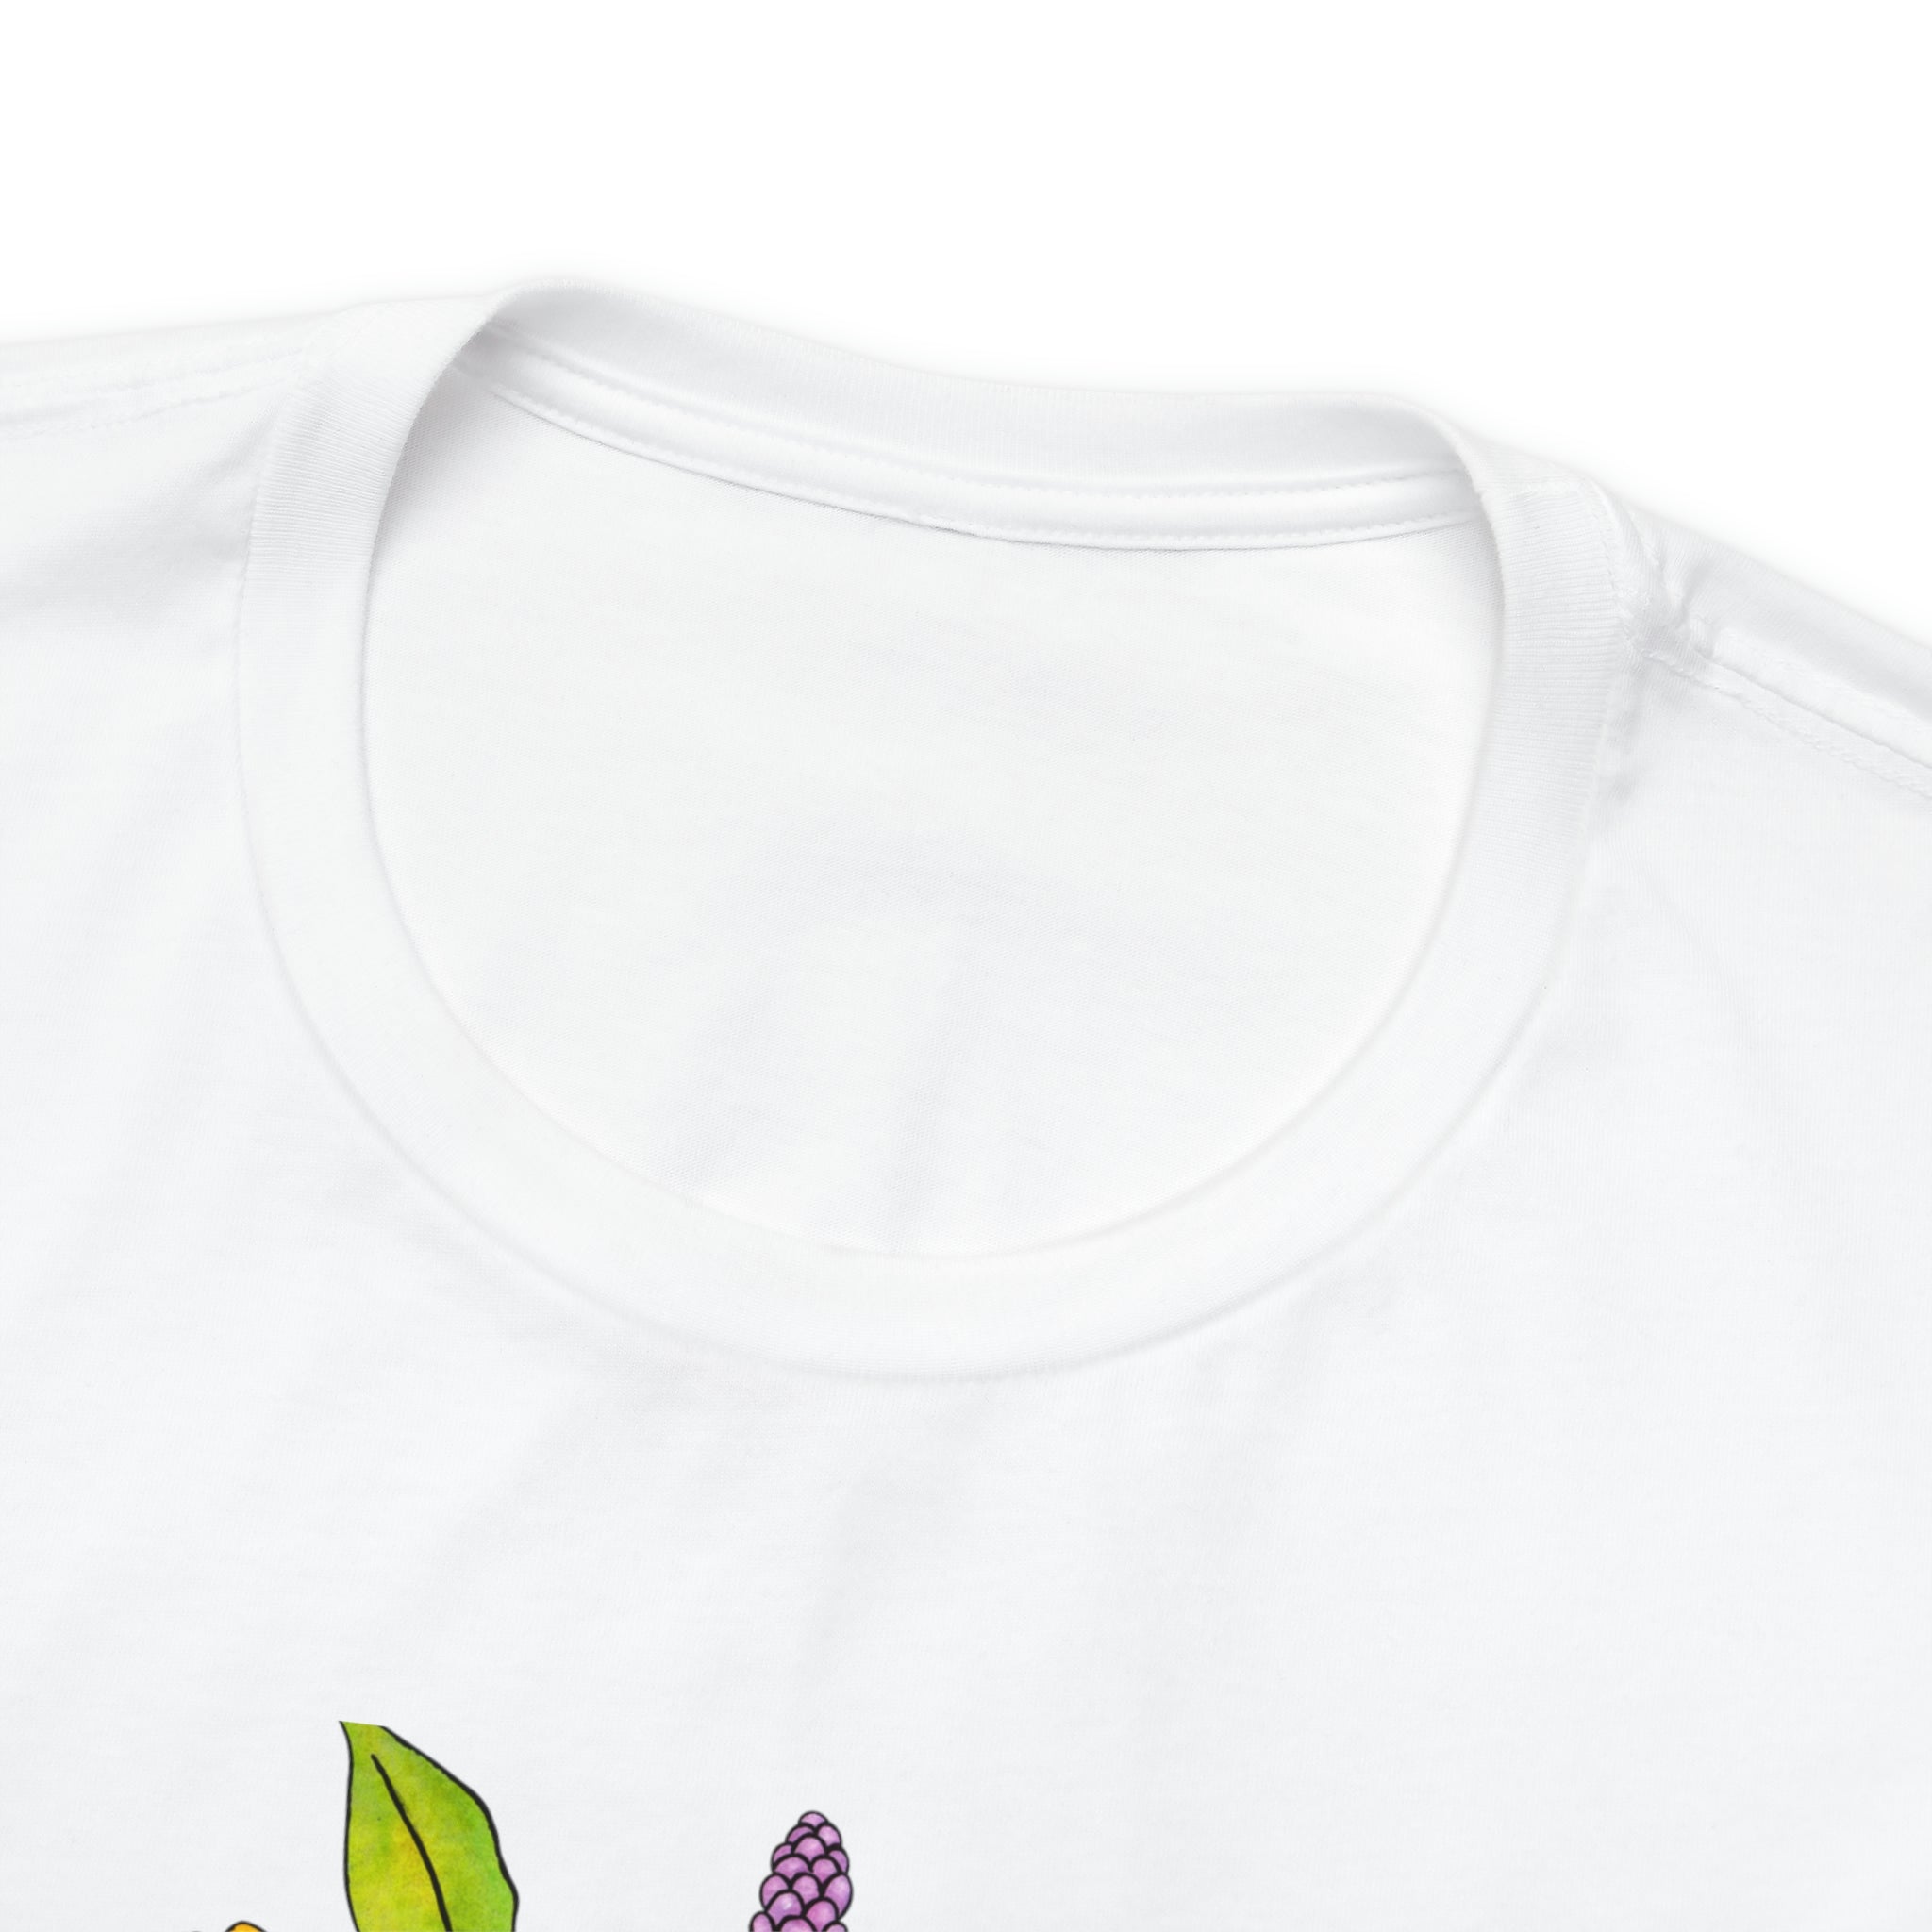 Garden Shirt Live Life In Full Bloom T-Shirt The Ultimate Tee for Plant Lovers